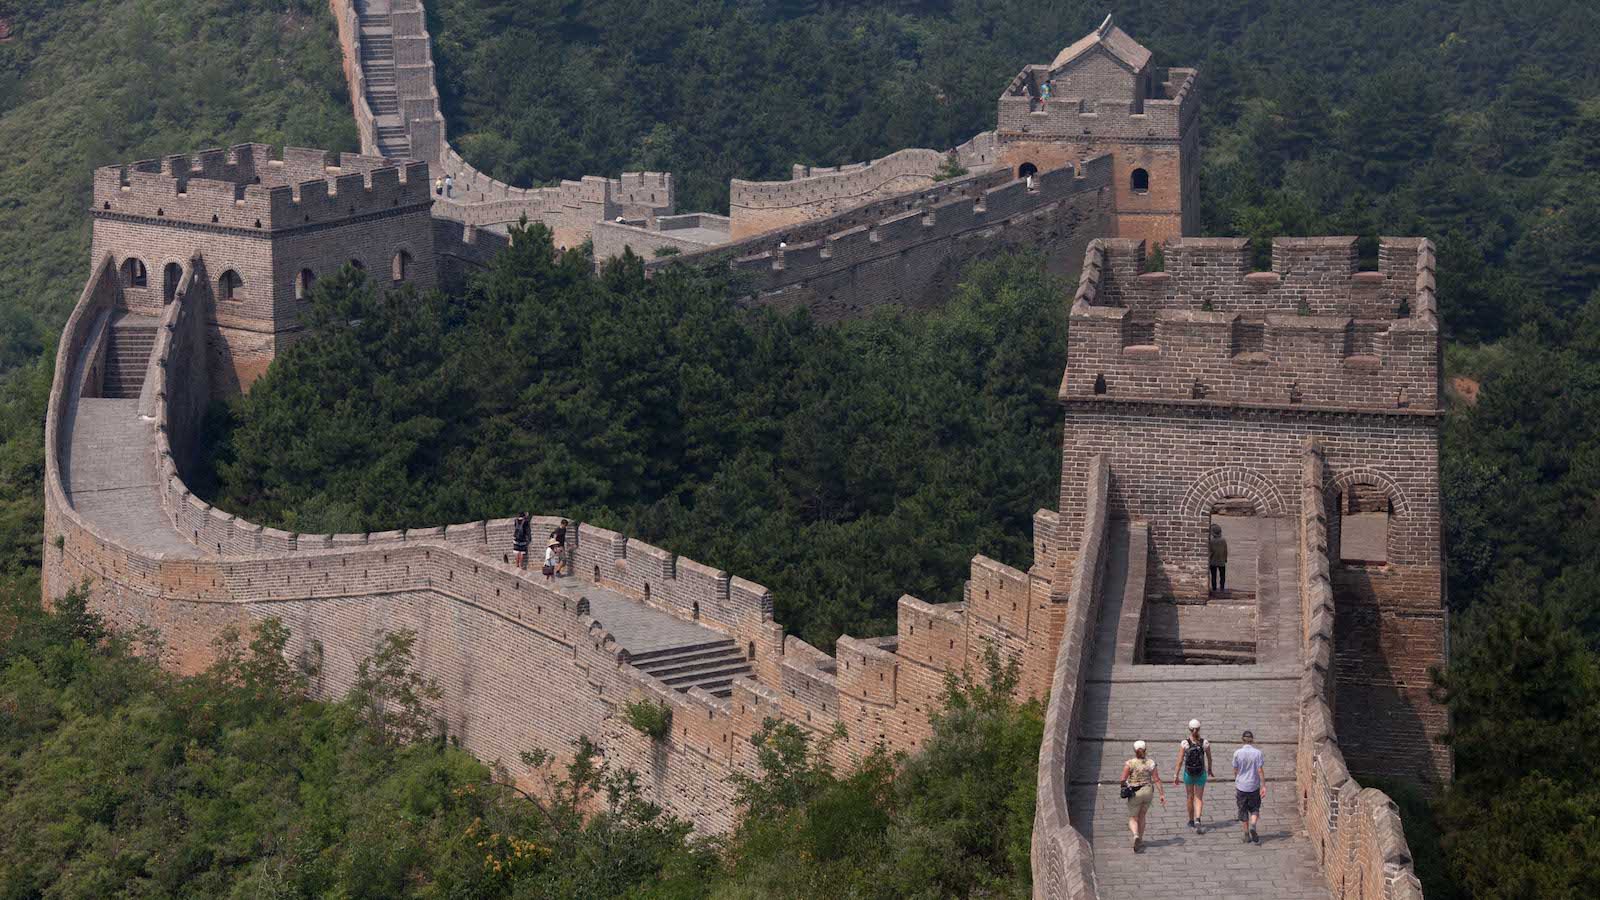 How Long Is the Great Wall of China?